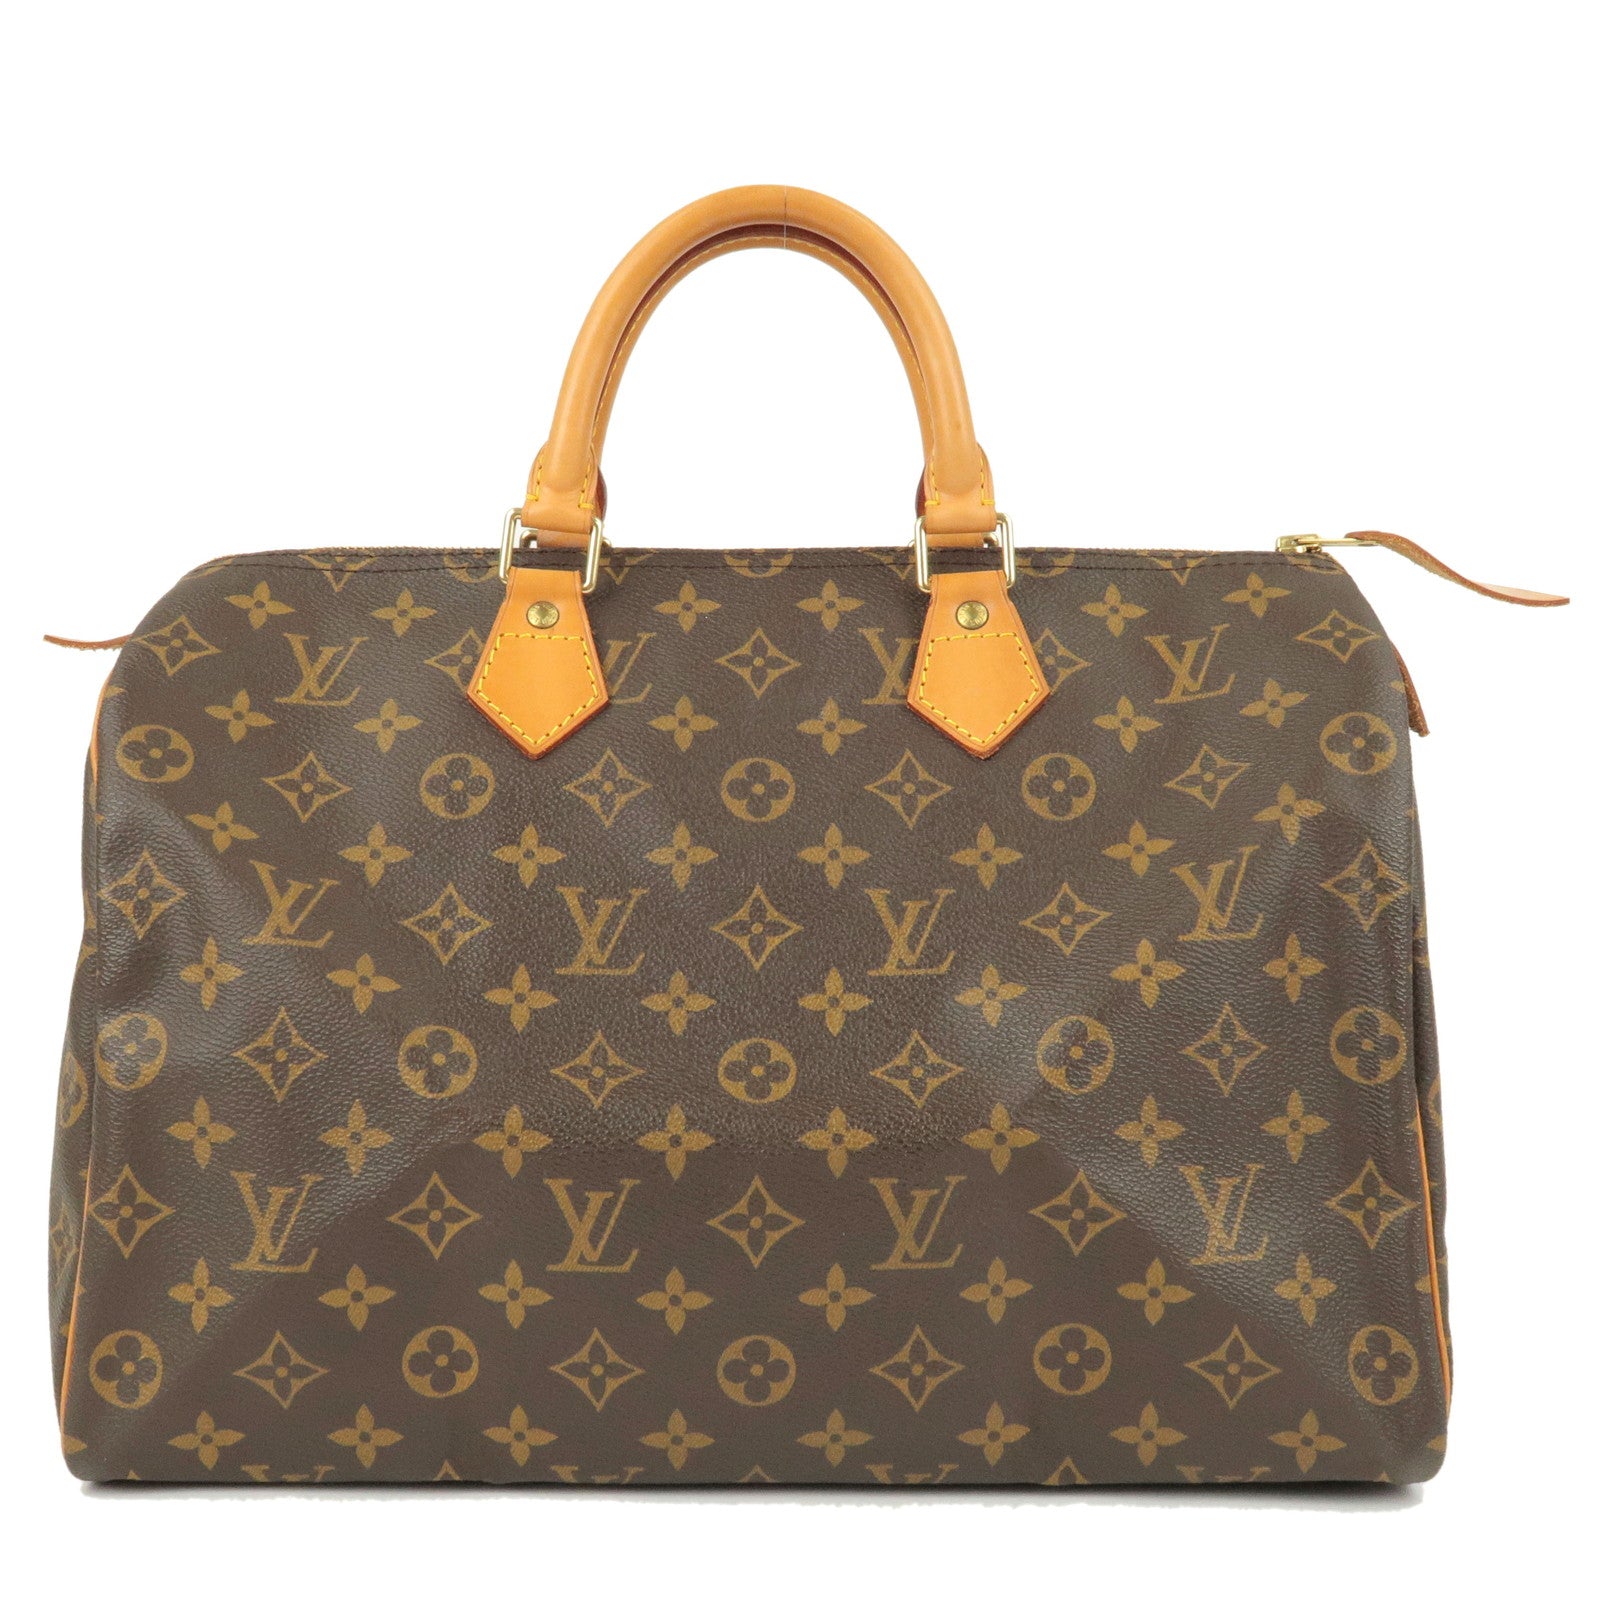 WHAT'S IN MY NEW BAG! LOUIS VUITTON MONTAIGNE BB REVEAL - INITIAL